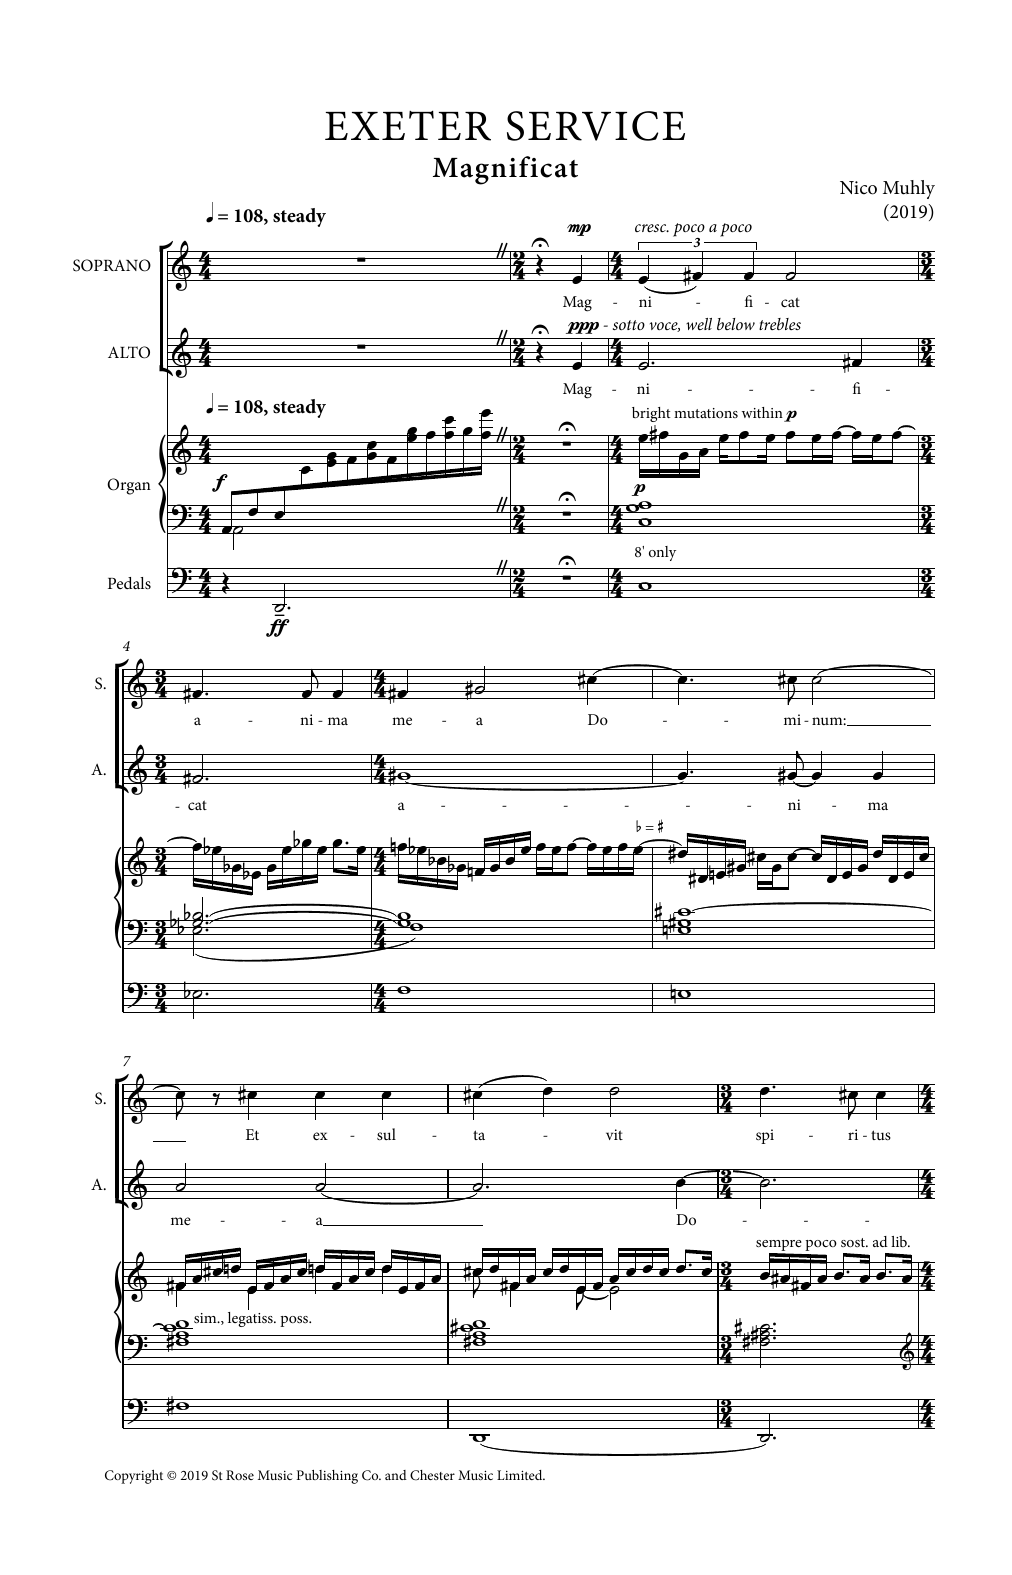 Download Nico Muhly Exeter Service Sheet Music